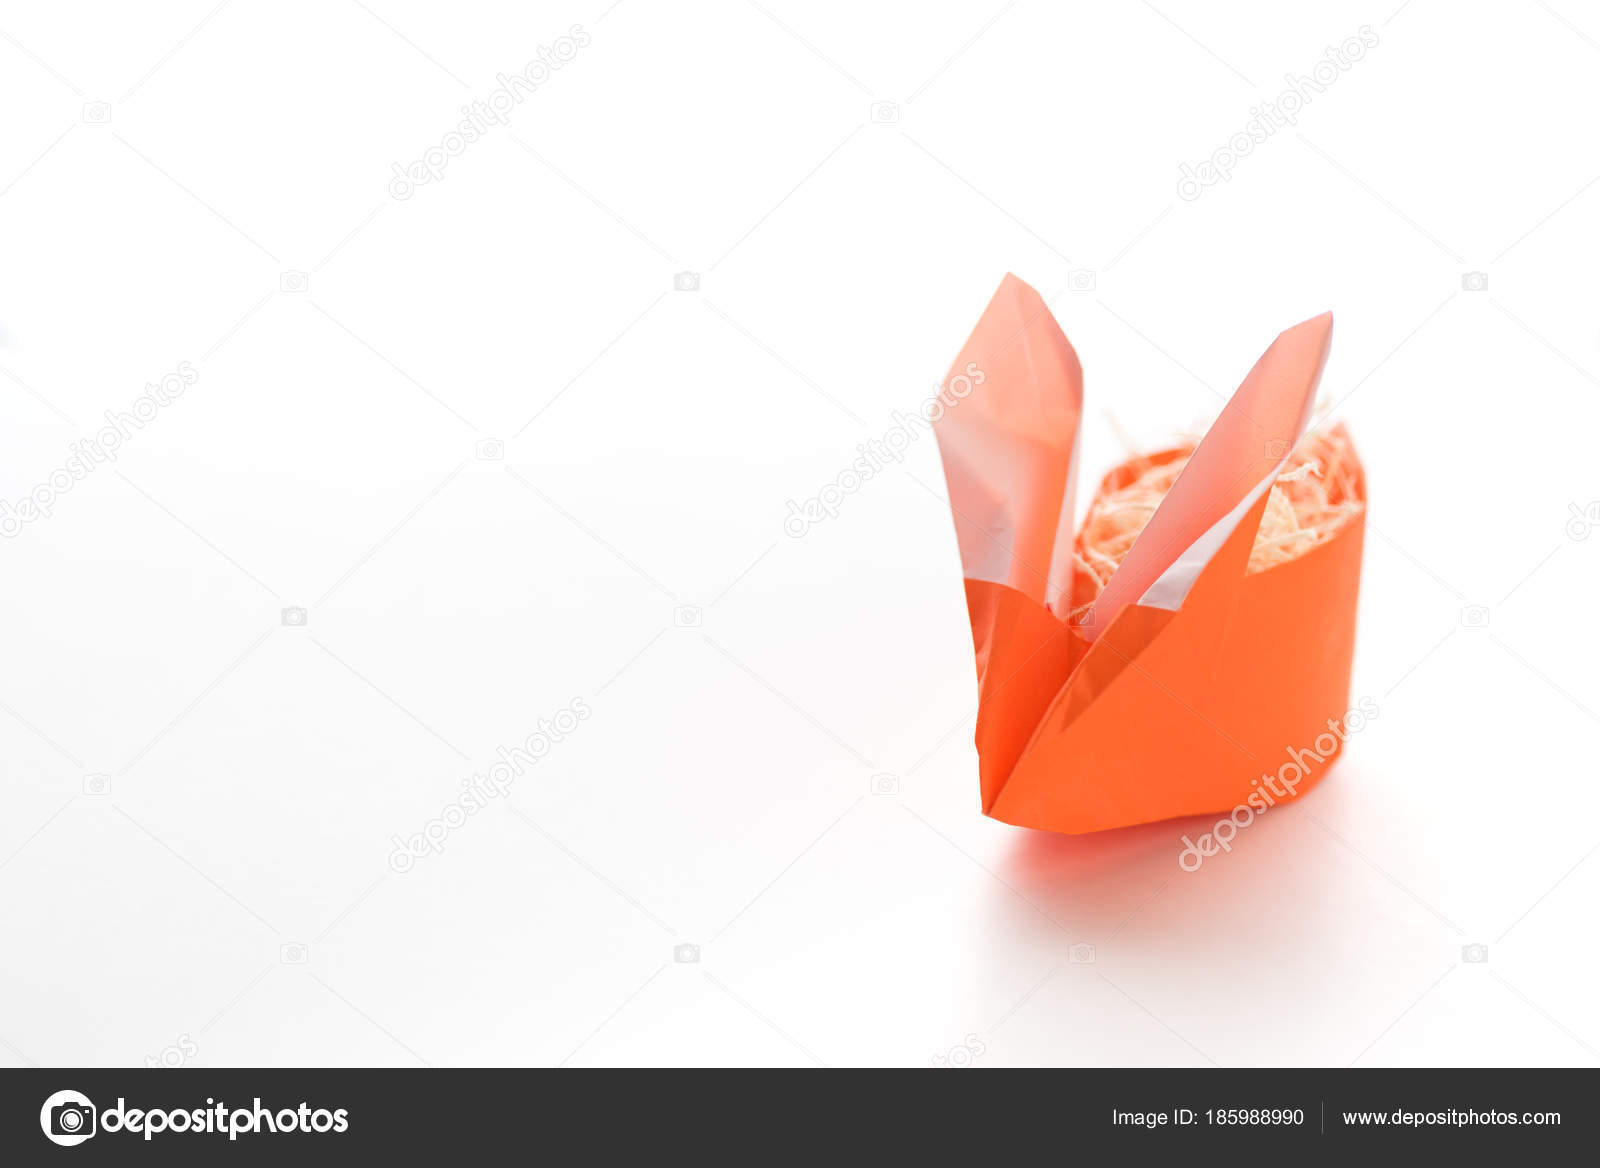 Origami Easter Basket One Orange Origami Easter Bunny Basket Stuffed With Straw Stock